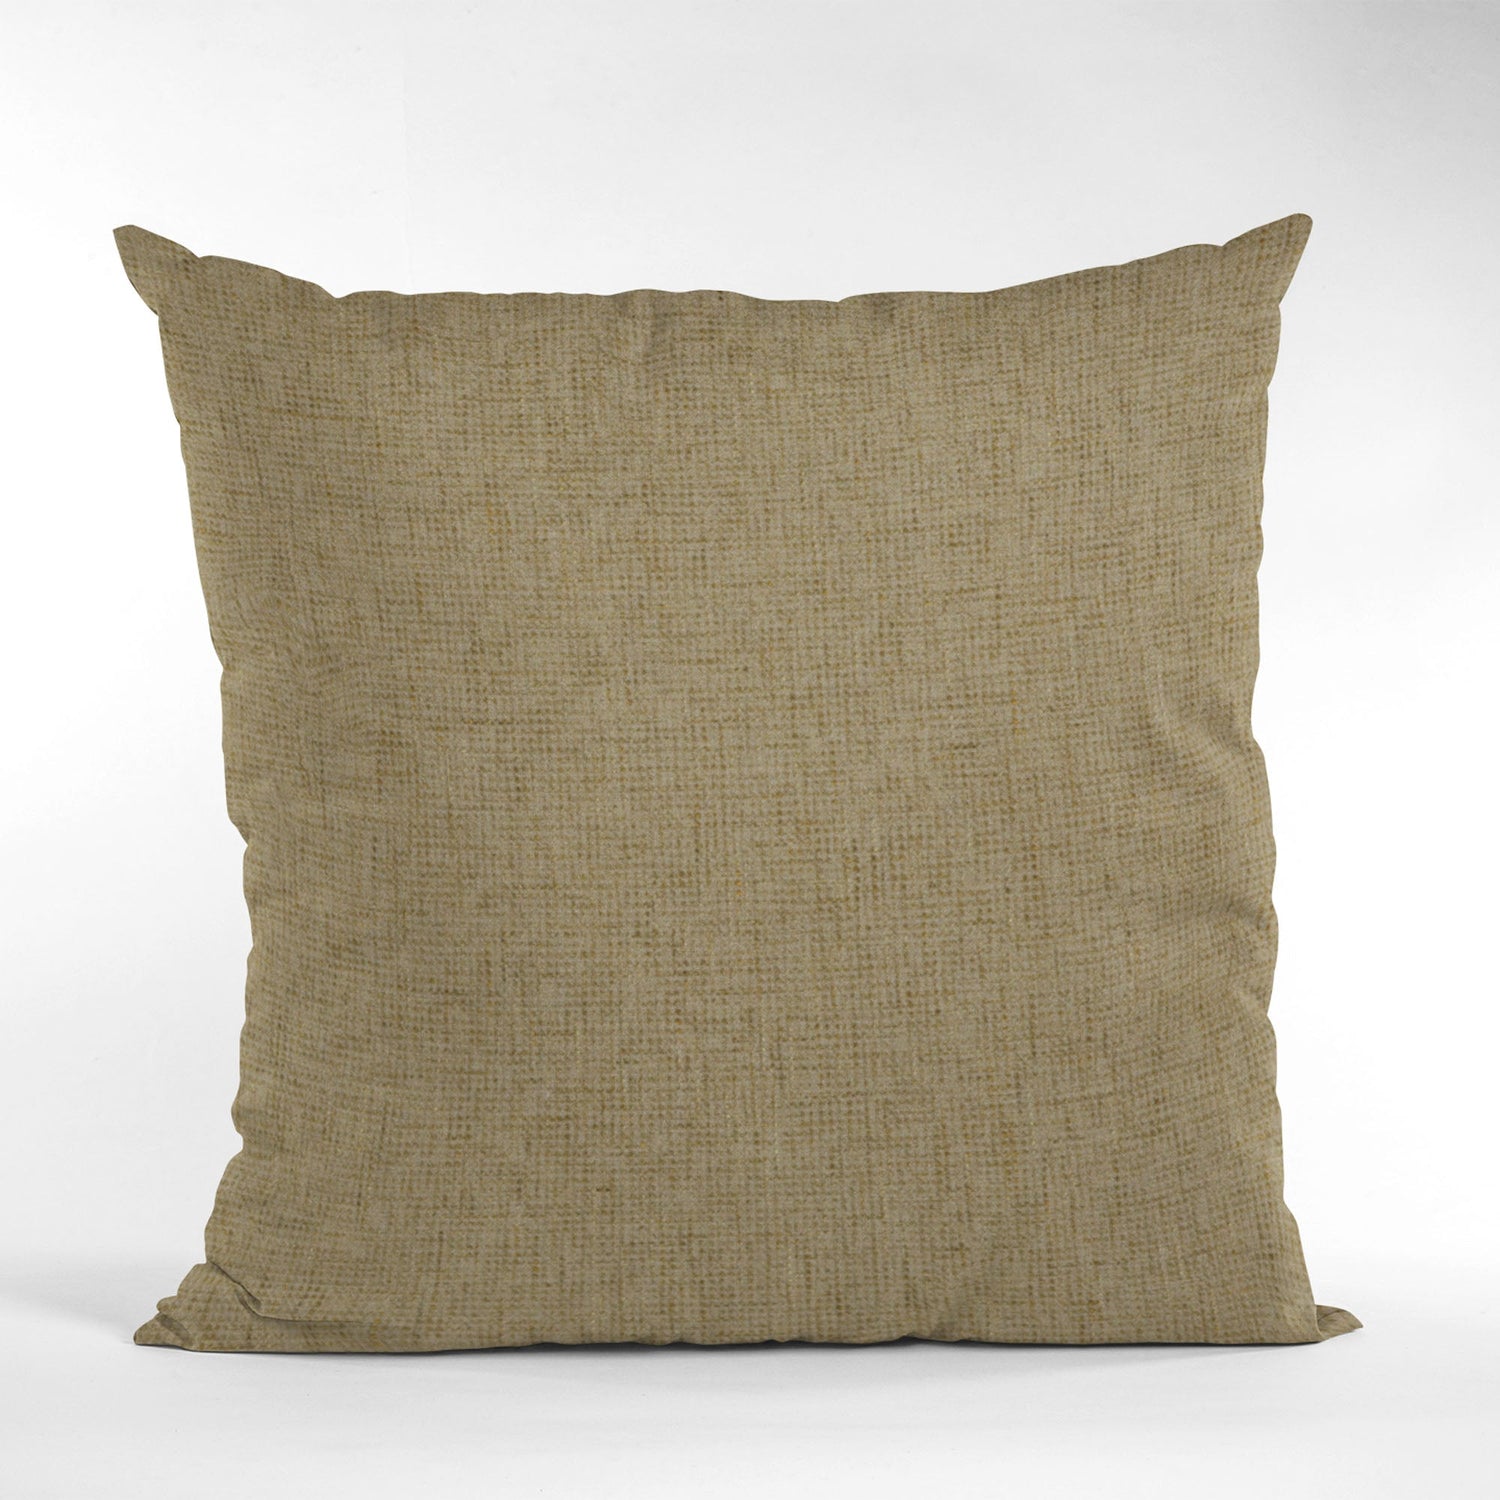 Plutus Safari Waffle Textured Solid, Sort of a Waffle Texture Luxury Throw Pillow